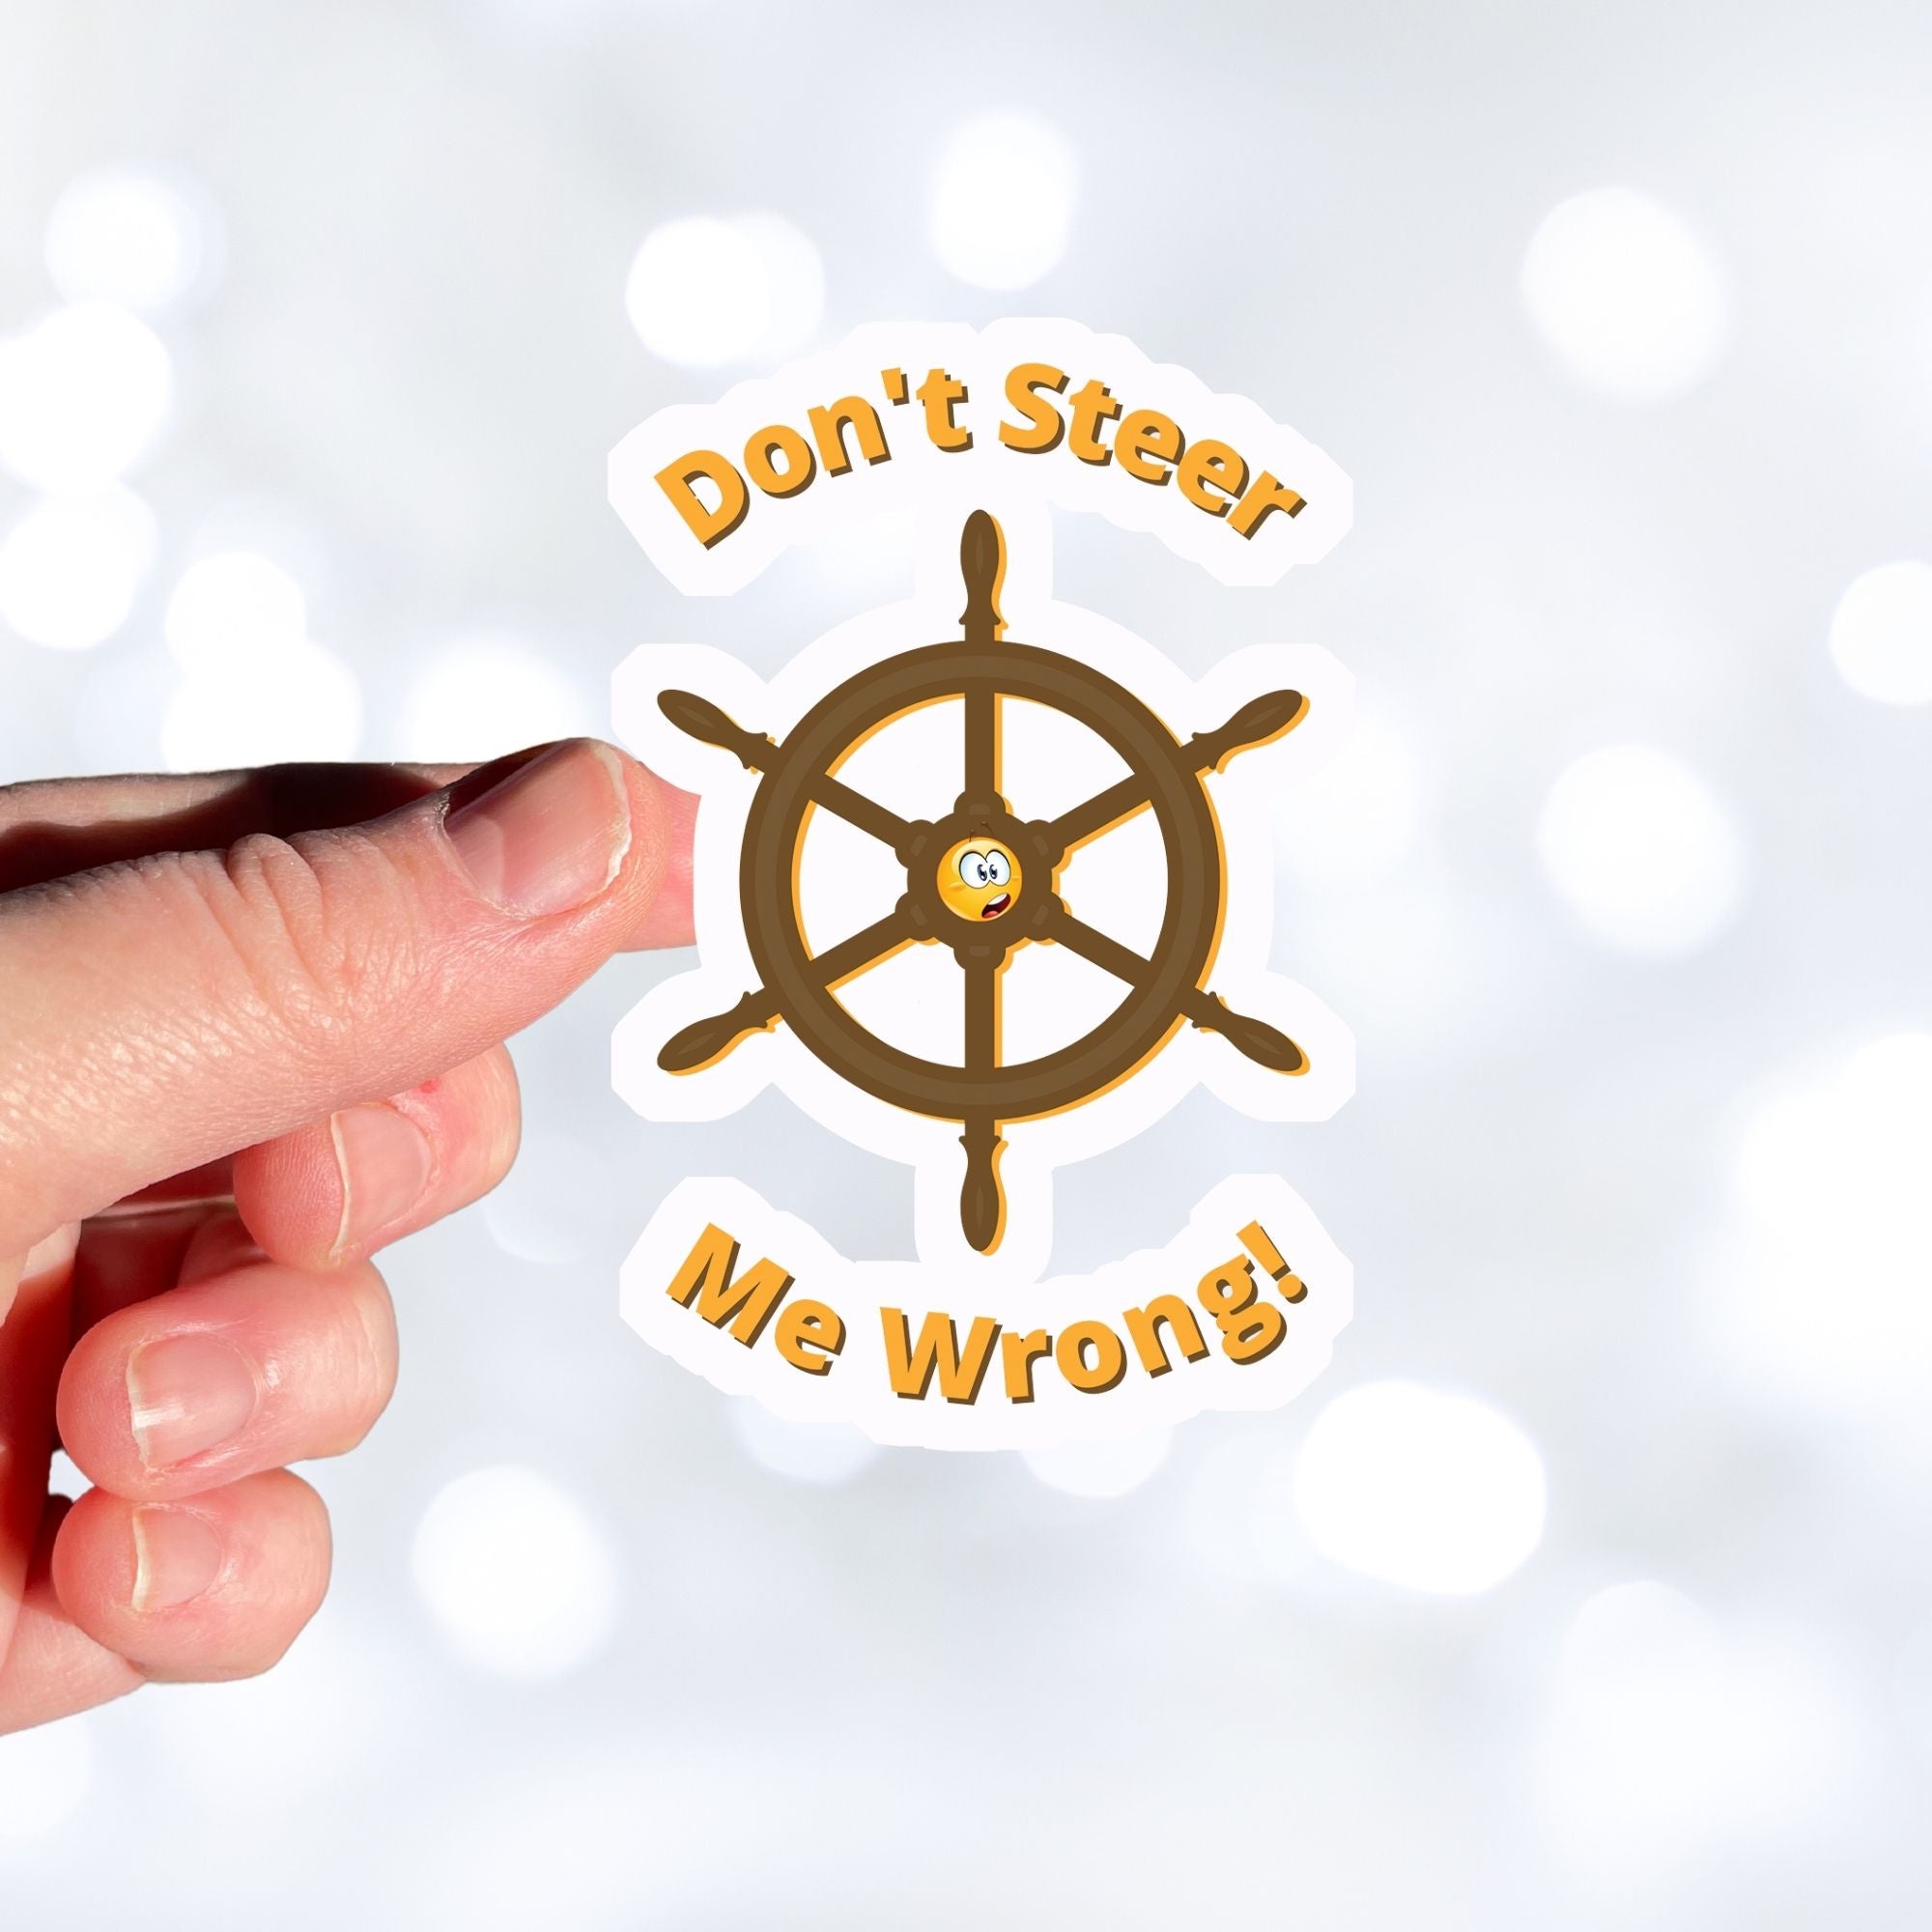 Don't Steer Me Wrong - good words to live by! This individual die-cut sticker features a wooden ship's wheel (tiller) with a shocked emoji face in the center and the words "Don't Steer Me Wrong!" above and below. This image shows a hand holding the sticker.